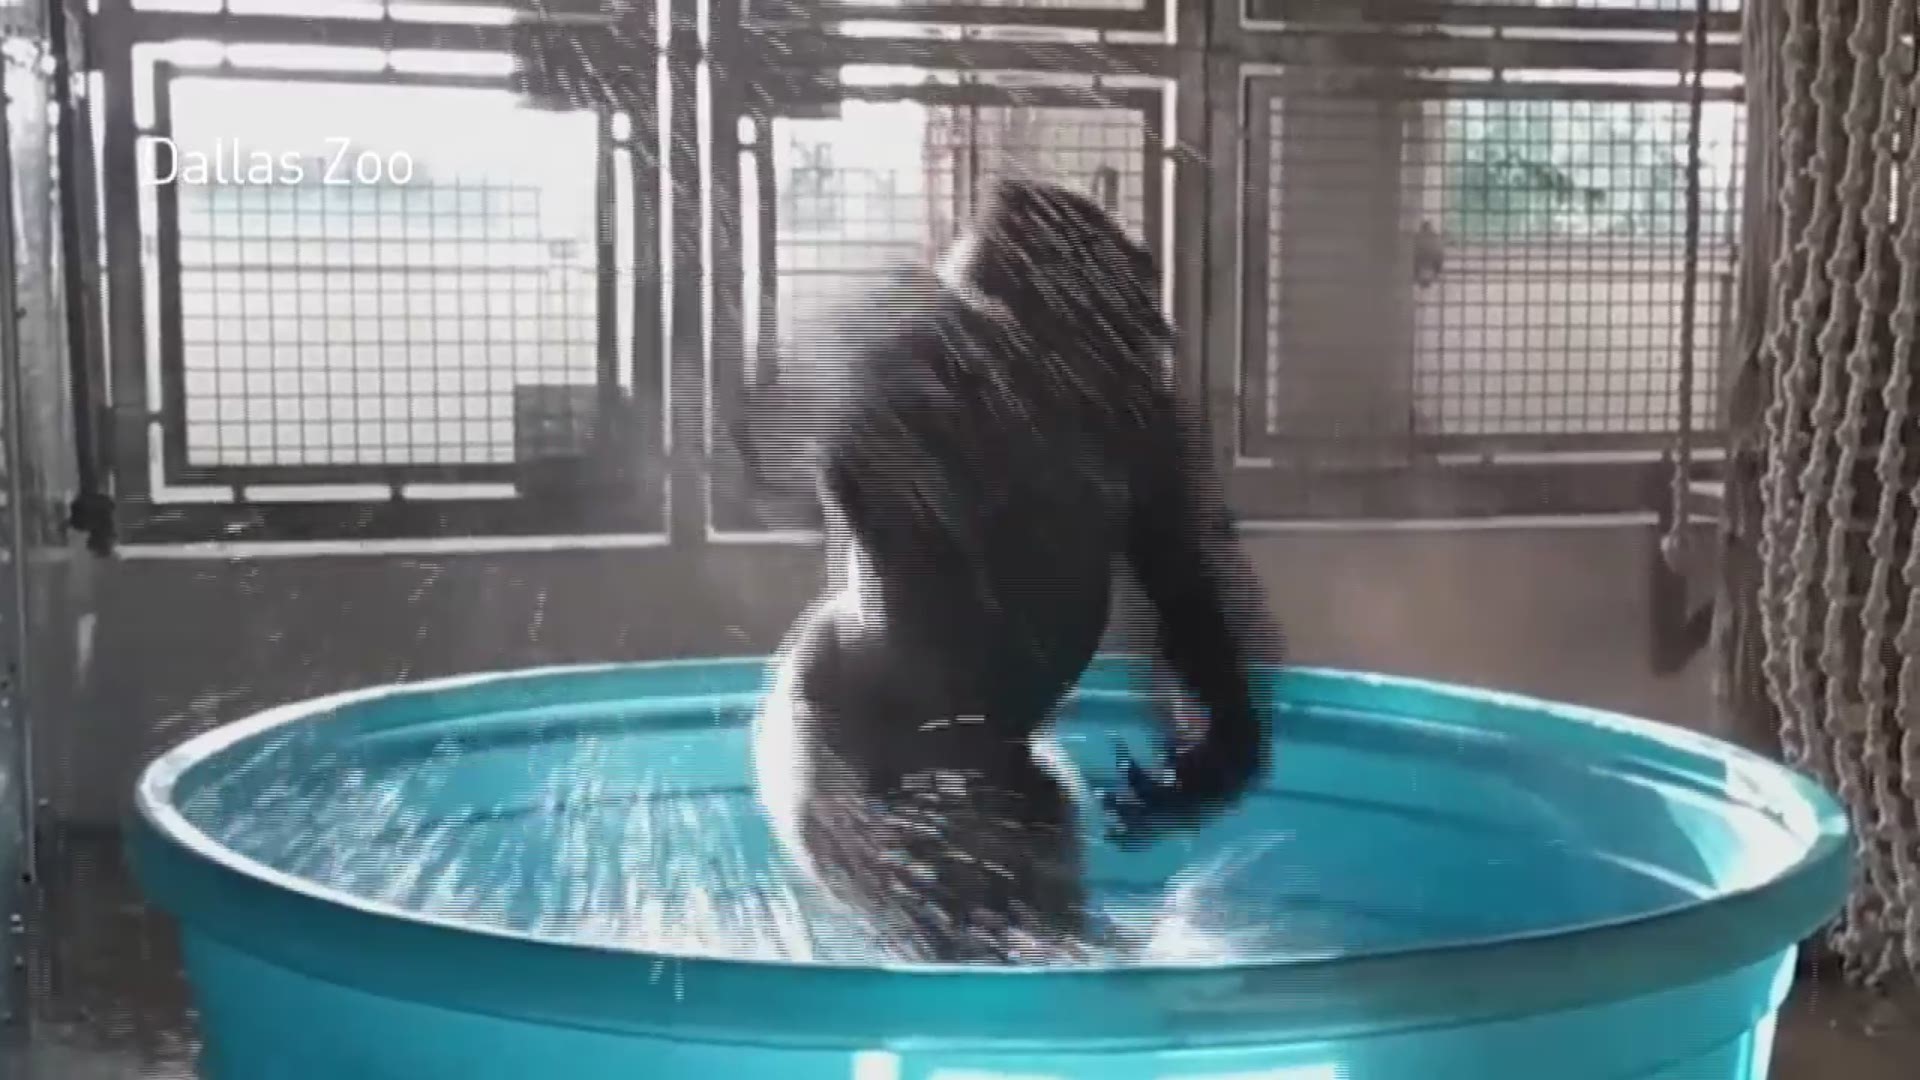 Gorilla dances like no one's watching at Dallas Zoo